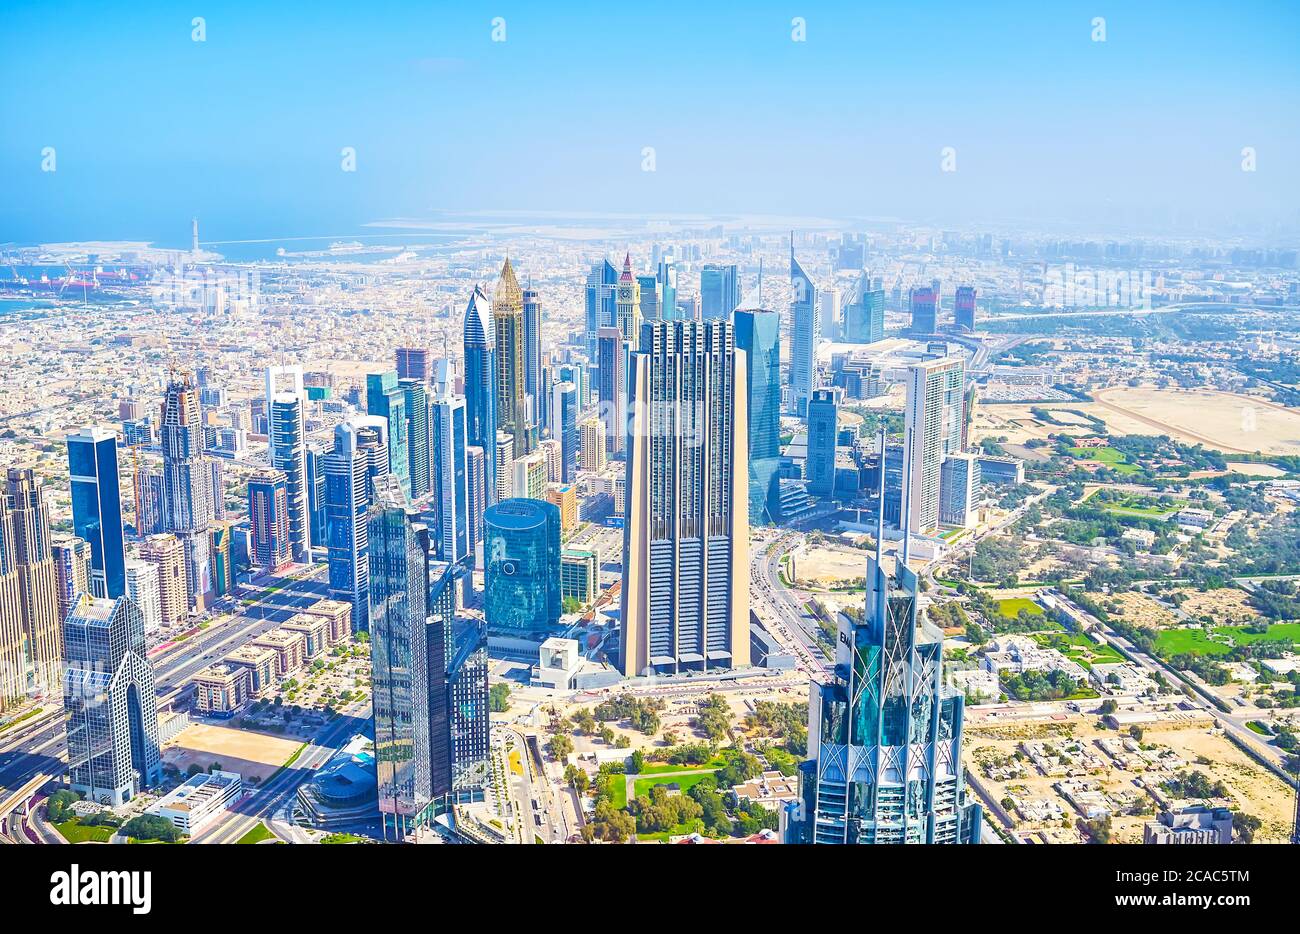 DUBAI, UAE - MARCH 3, 2020: The business center in Dubai is settled in skyscrapers, built along Sheikh Zayed Road, on March 3 in Dubai Stock Photo